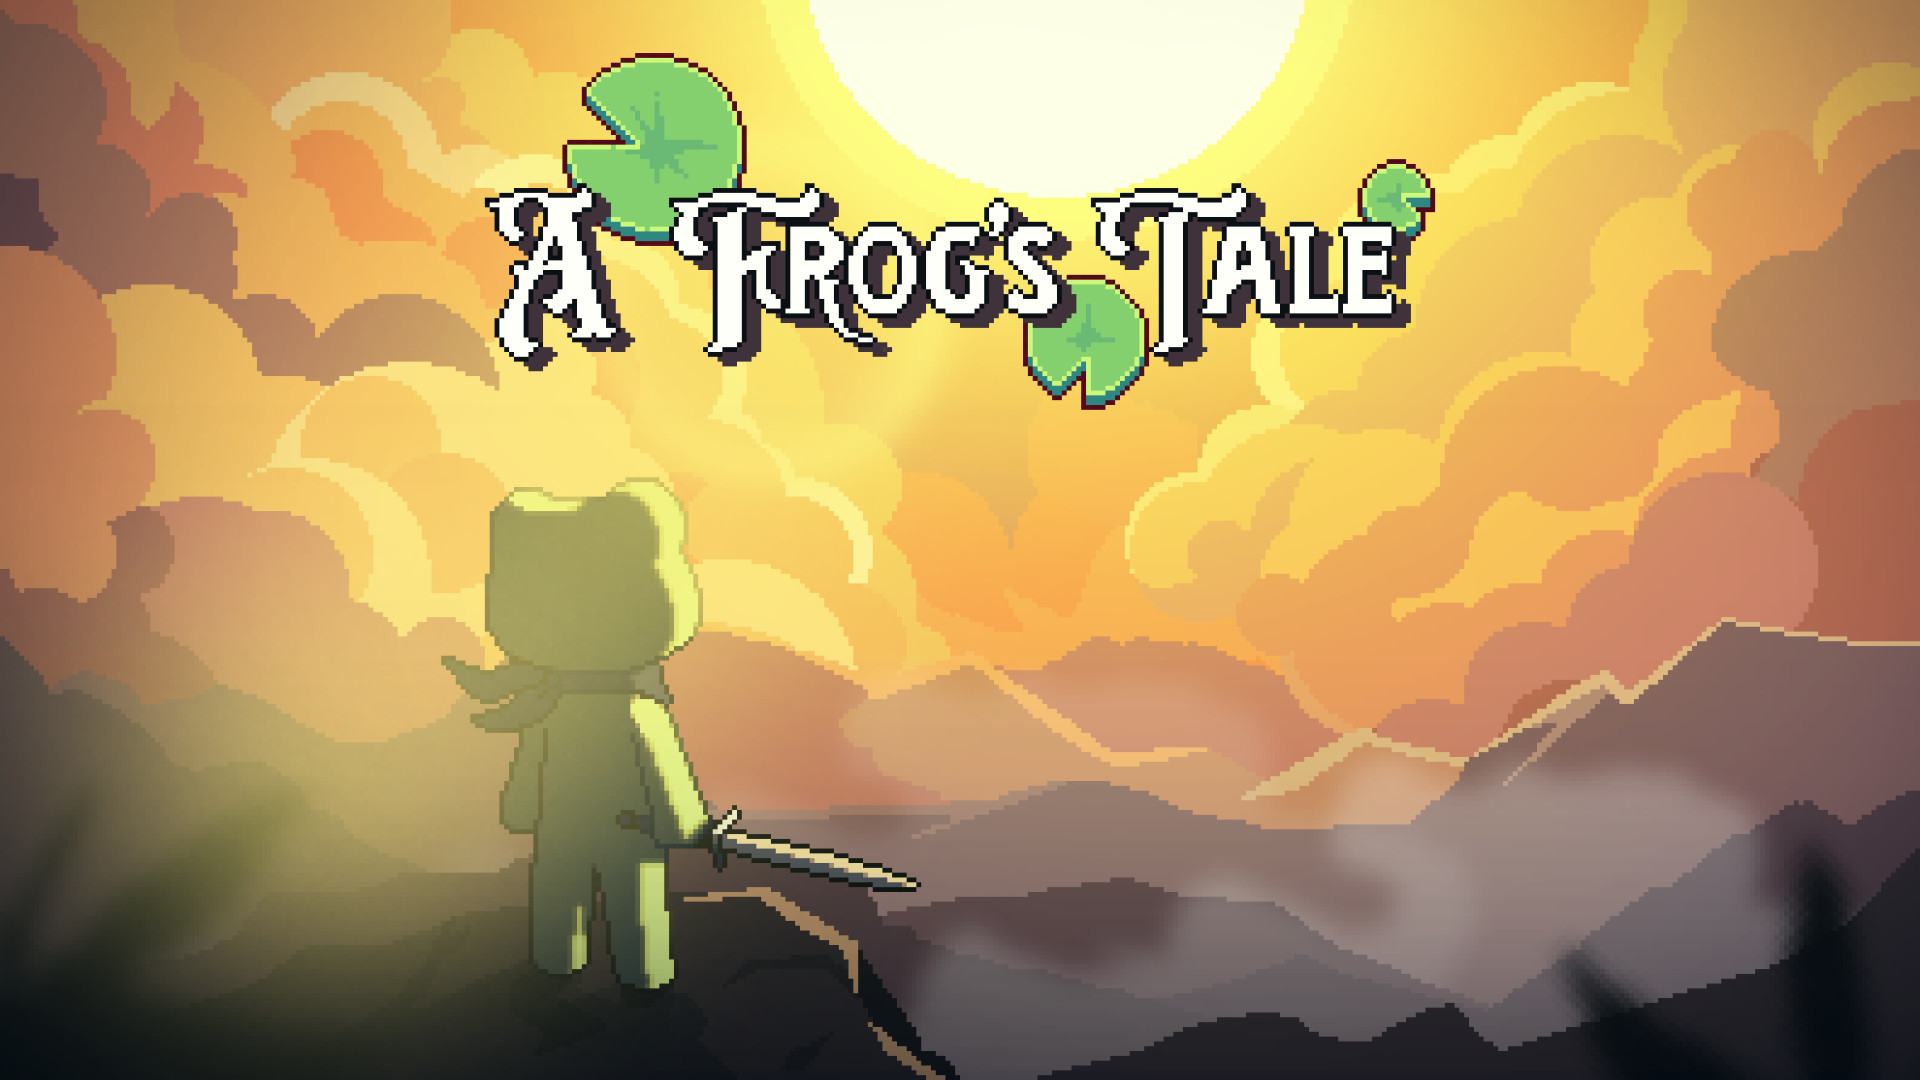 Video Game A Frog's Tale HD Wallpaper